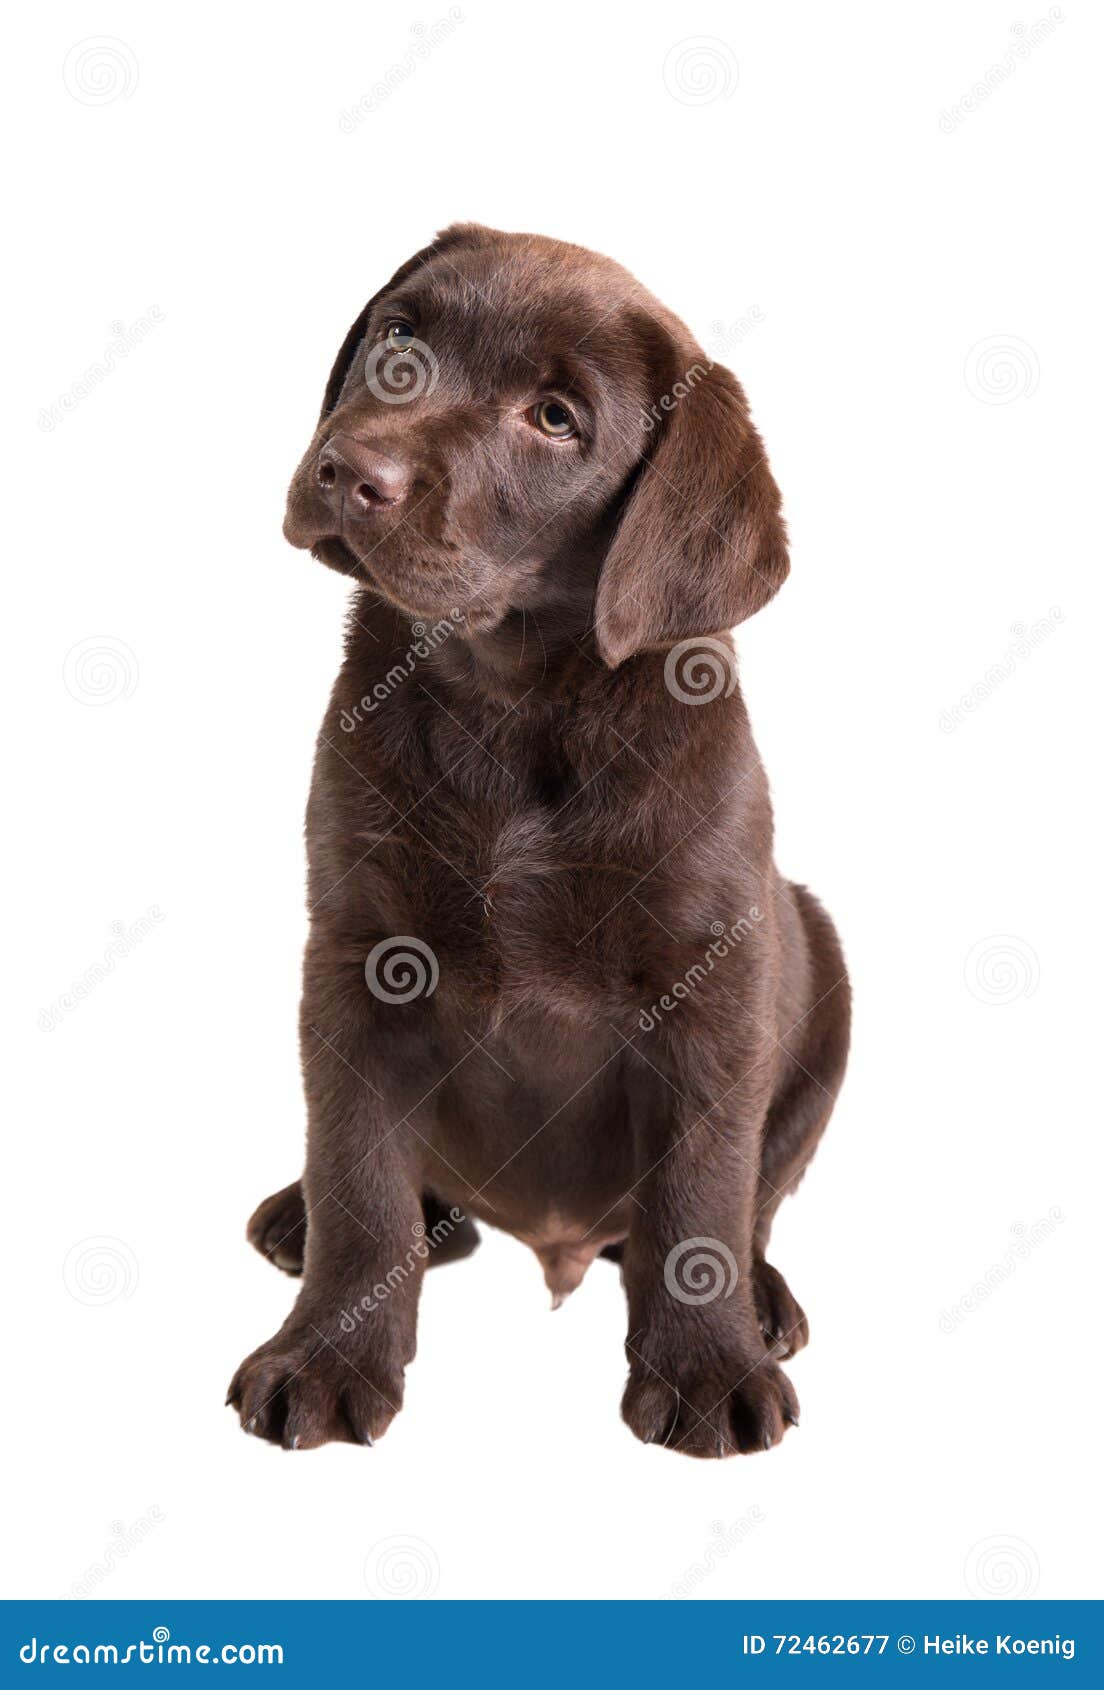 Transparant rand Schat Brown Labrador Retriever Puppy Stock Image - Image of breed, amazing:  72462677